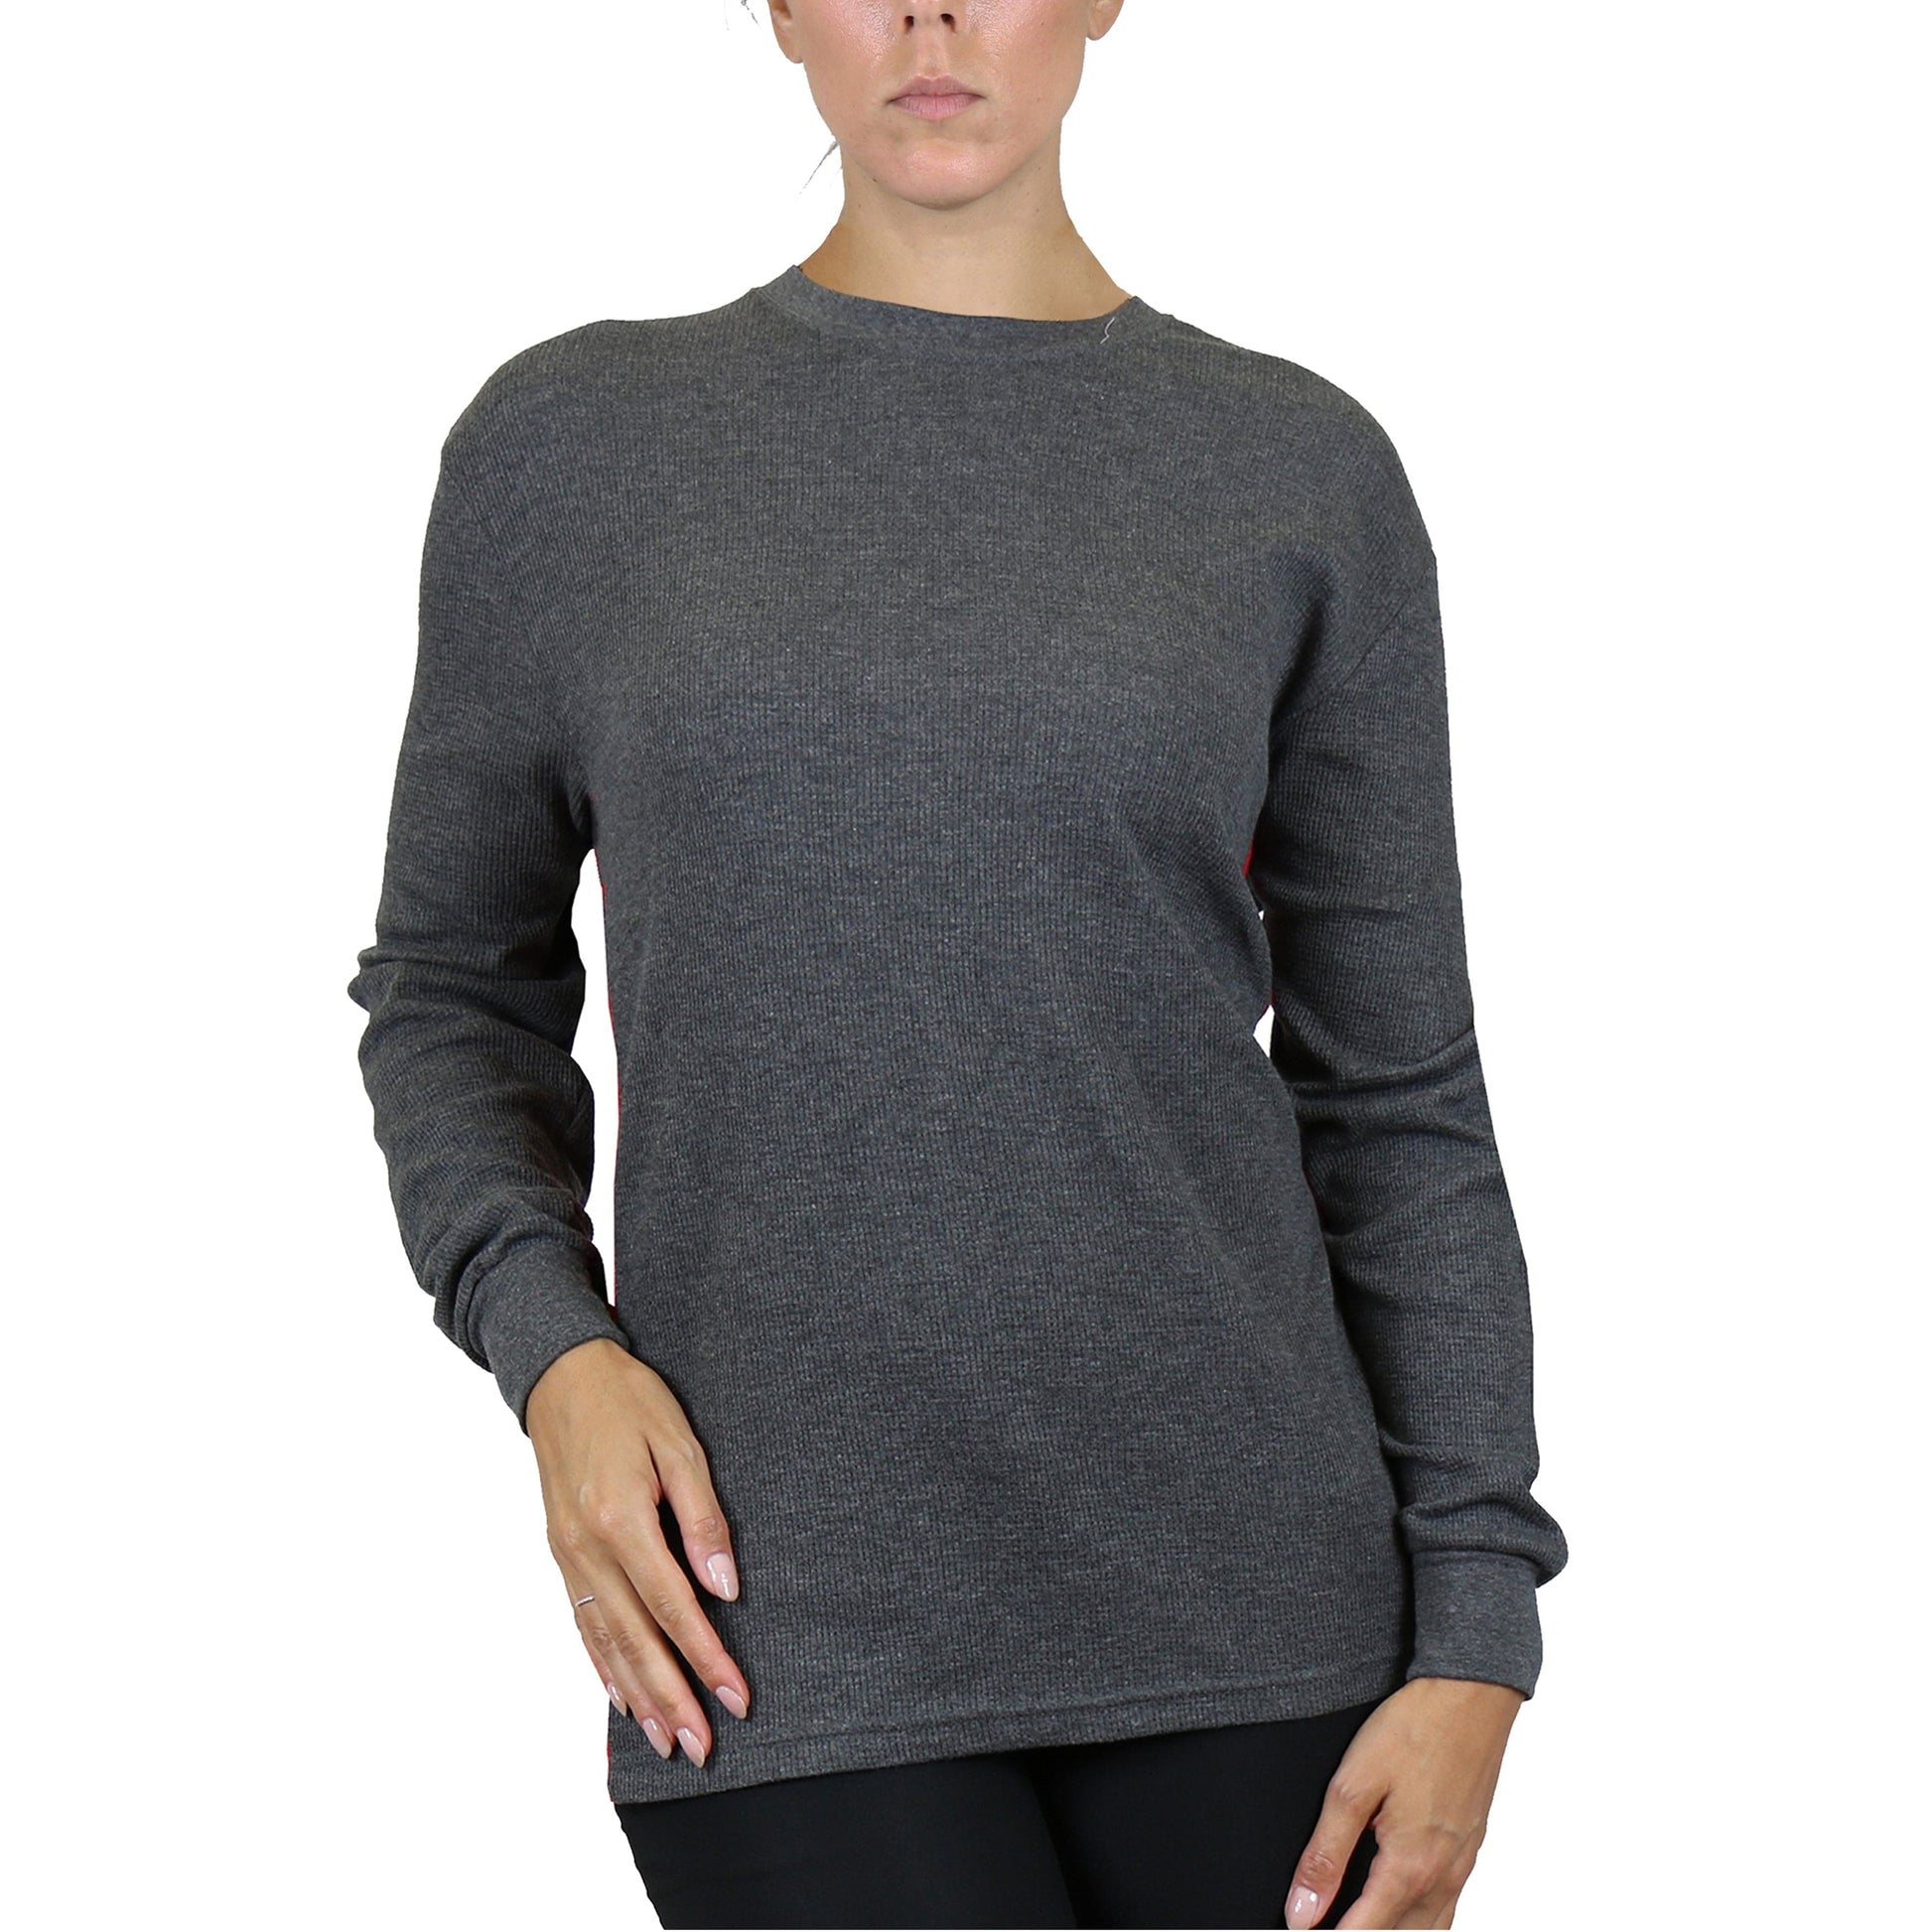 5-Pack Women's Long Sleeve Oversize Loose Fit Thermal Shirts (Sizes, S-5XL) - GalaxybyHarvic